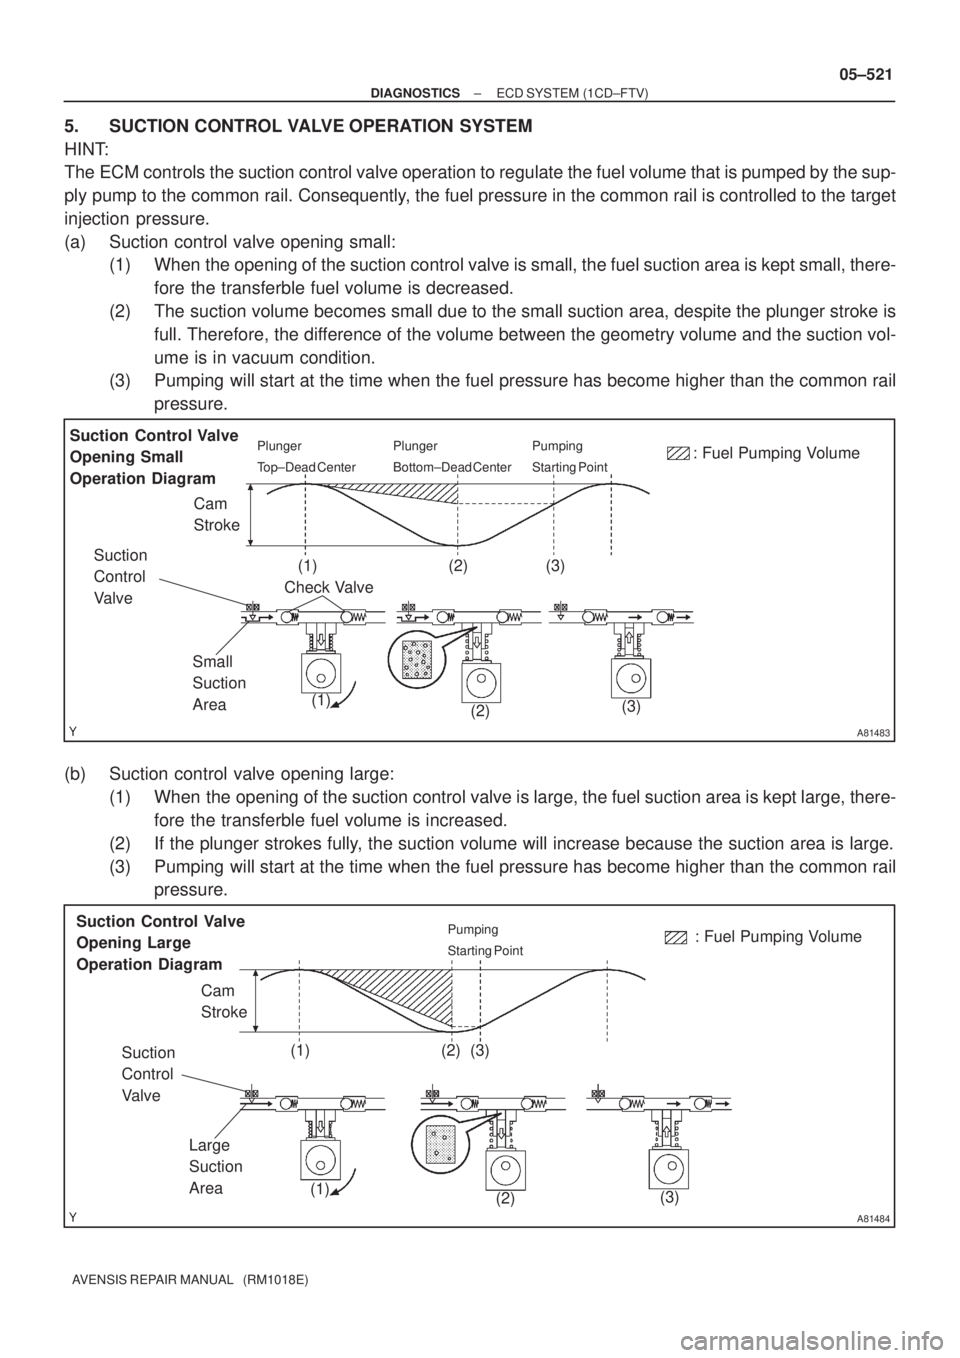 TOYOTA AVENSIS 2005  Service Repair Manual A81483
Suction  Control Valve 
Opening Small 
Operation DiagramPlunger 
Top±Dead CenterPlunger 
Bottom±Dead CenterPumping 
Starting Point
Cam 
Stroke: Fuel Pumping Volume
Check Valve
Small 
Suction 